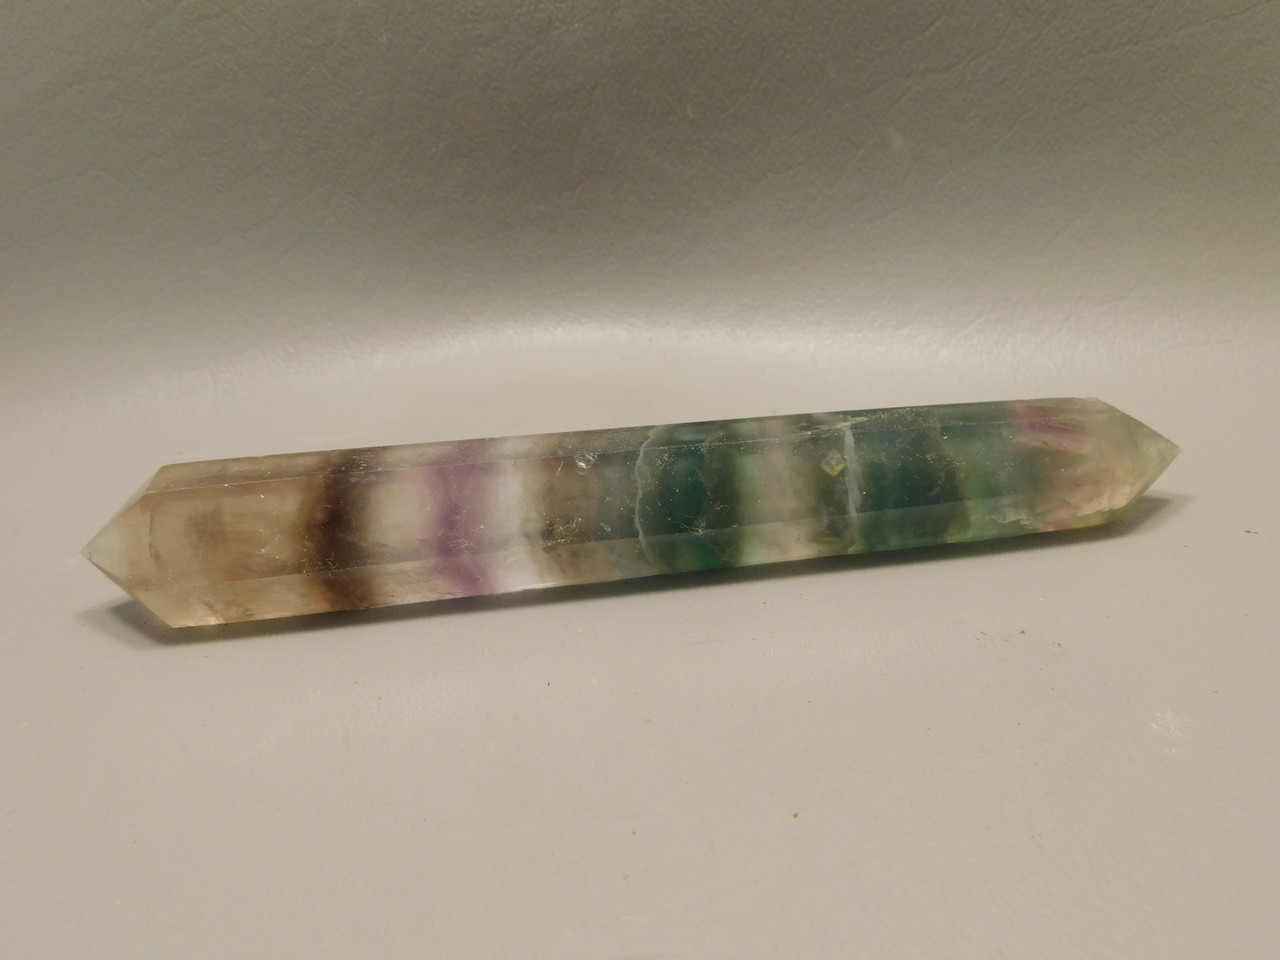 Fluorite Crystal Large Double Terminated Point 6 inch Wand #O16